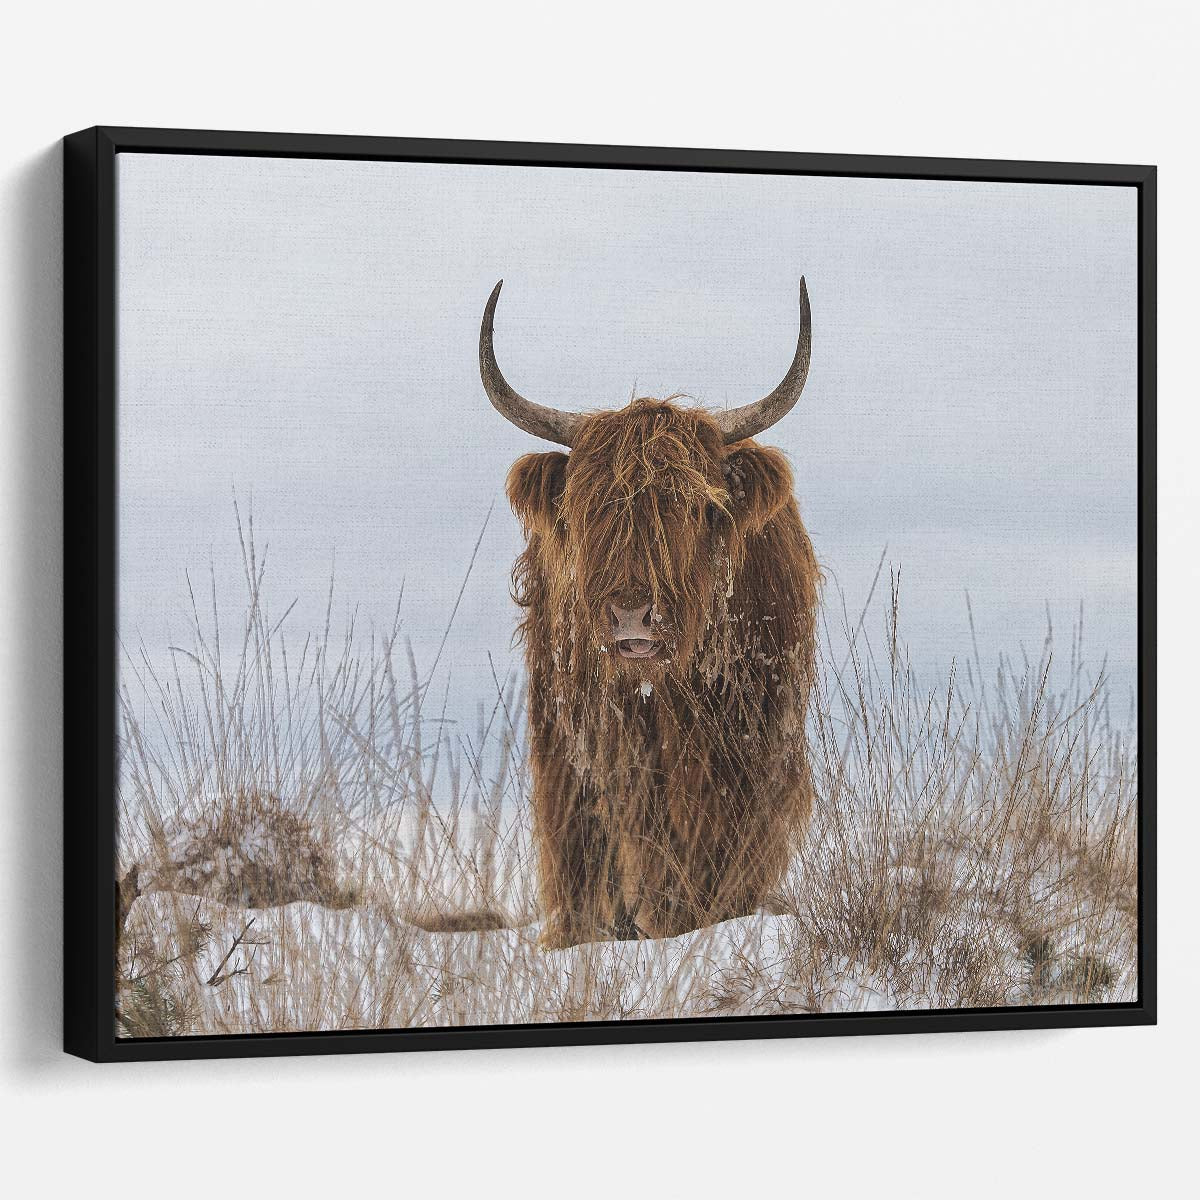 Frosty Highland Cow in Snowy Veluwe Wall Art by Luxuriance Designs. Made in USA.